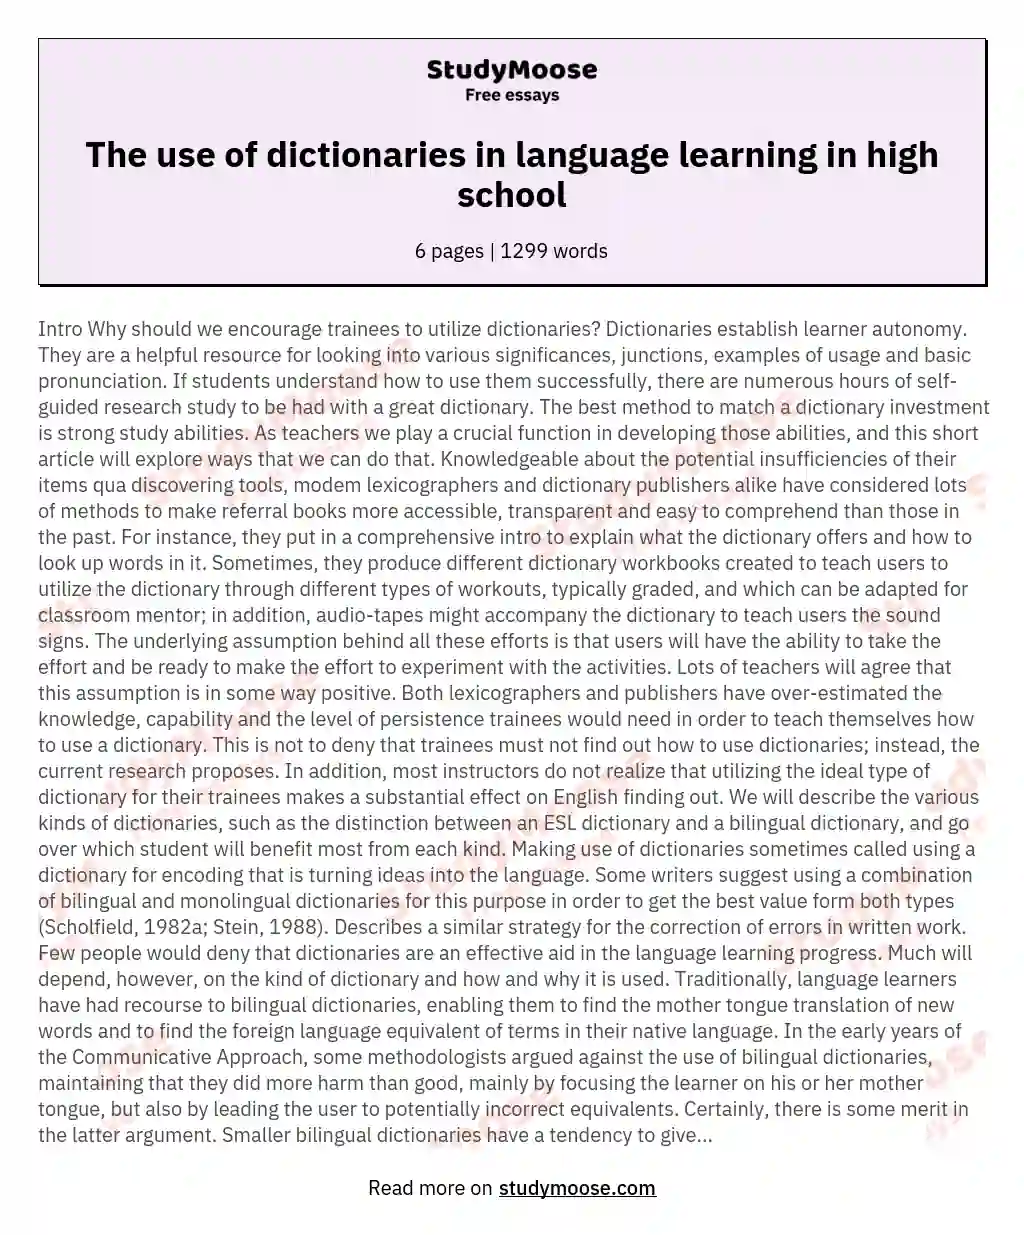 The use of dictionaries in language learning in high school essay